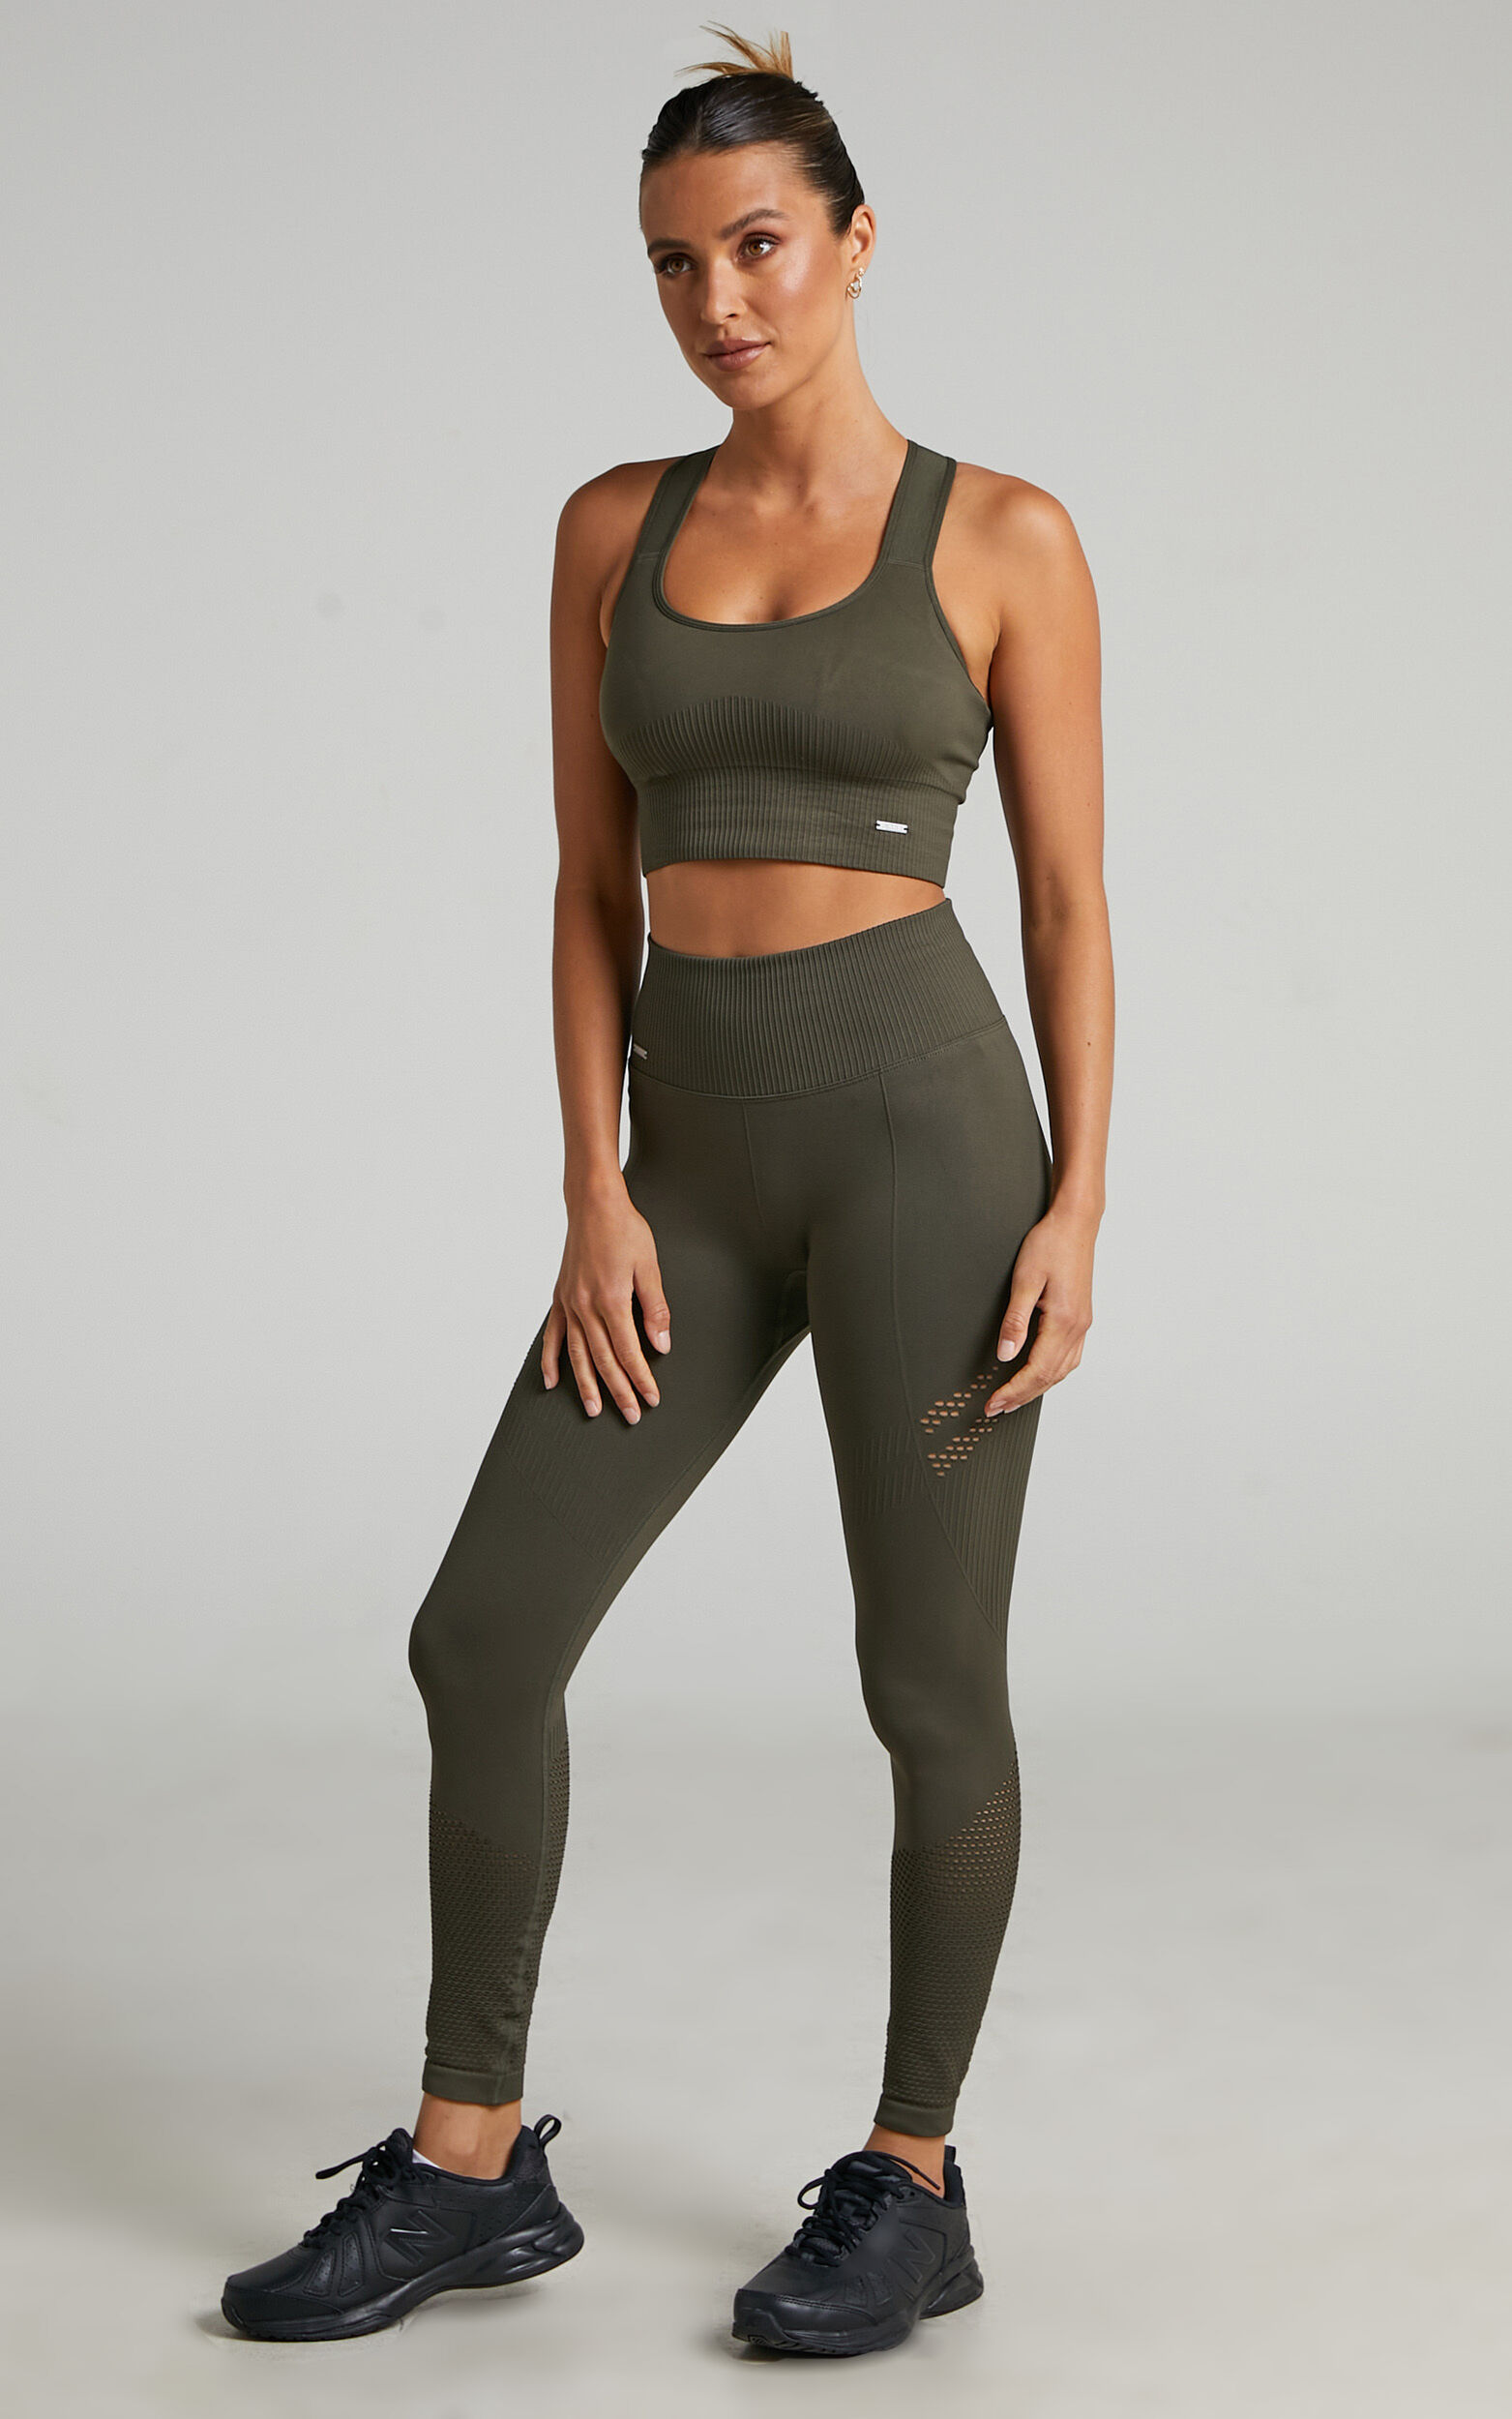 Seamless tights - buy aim'n seamless tights online